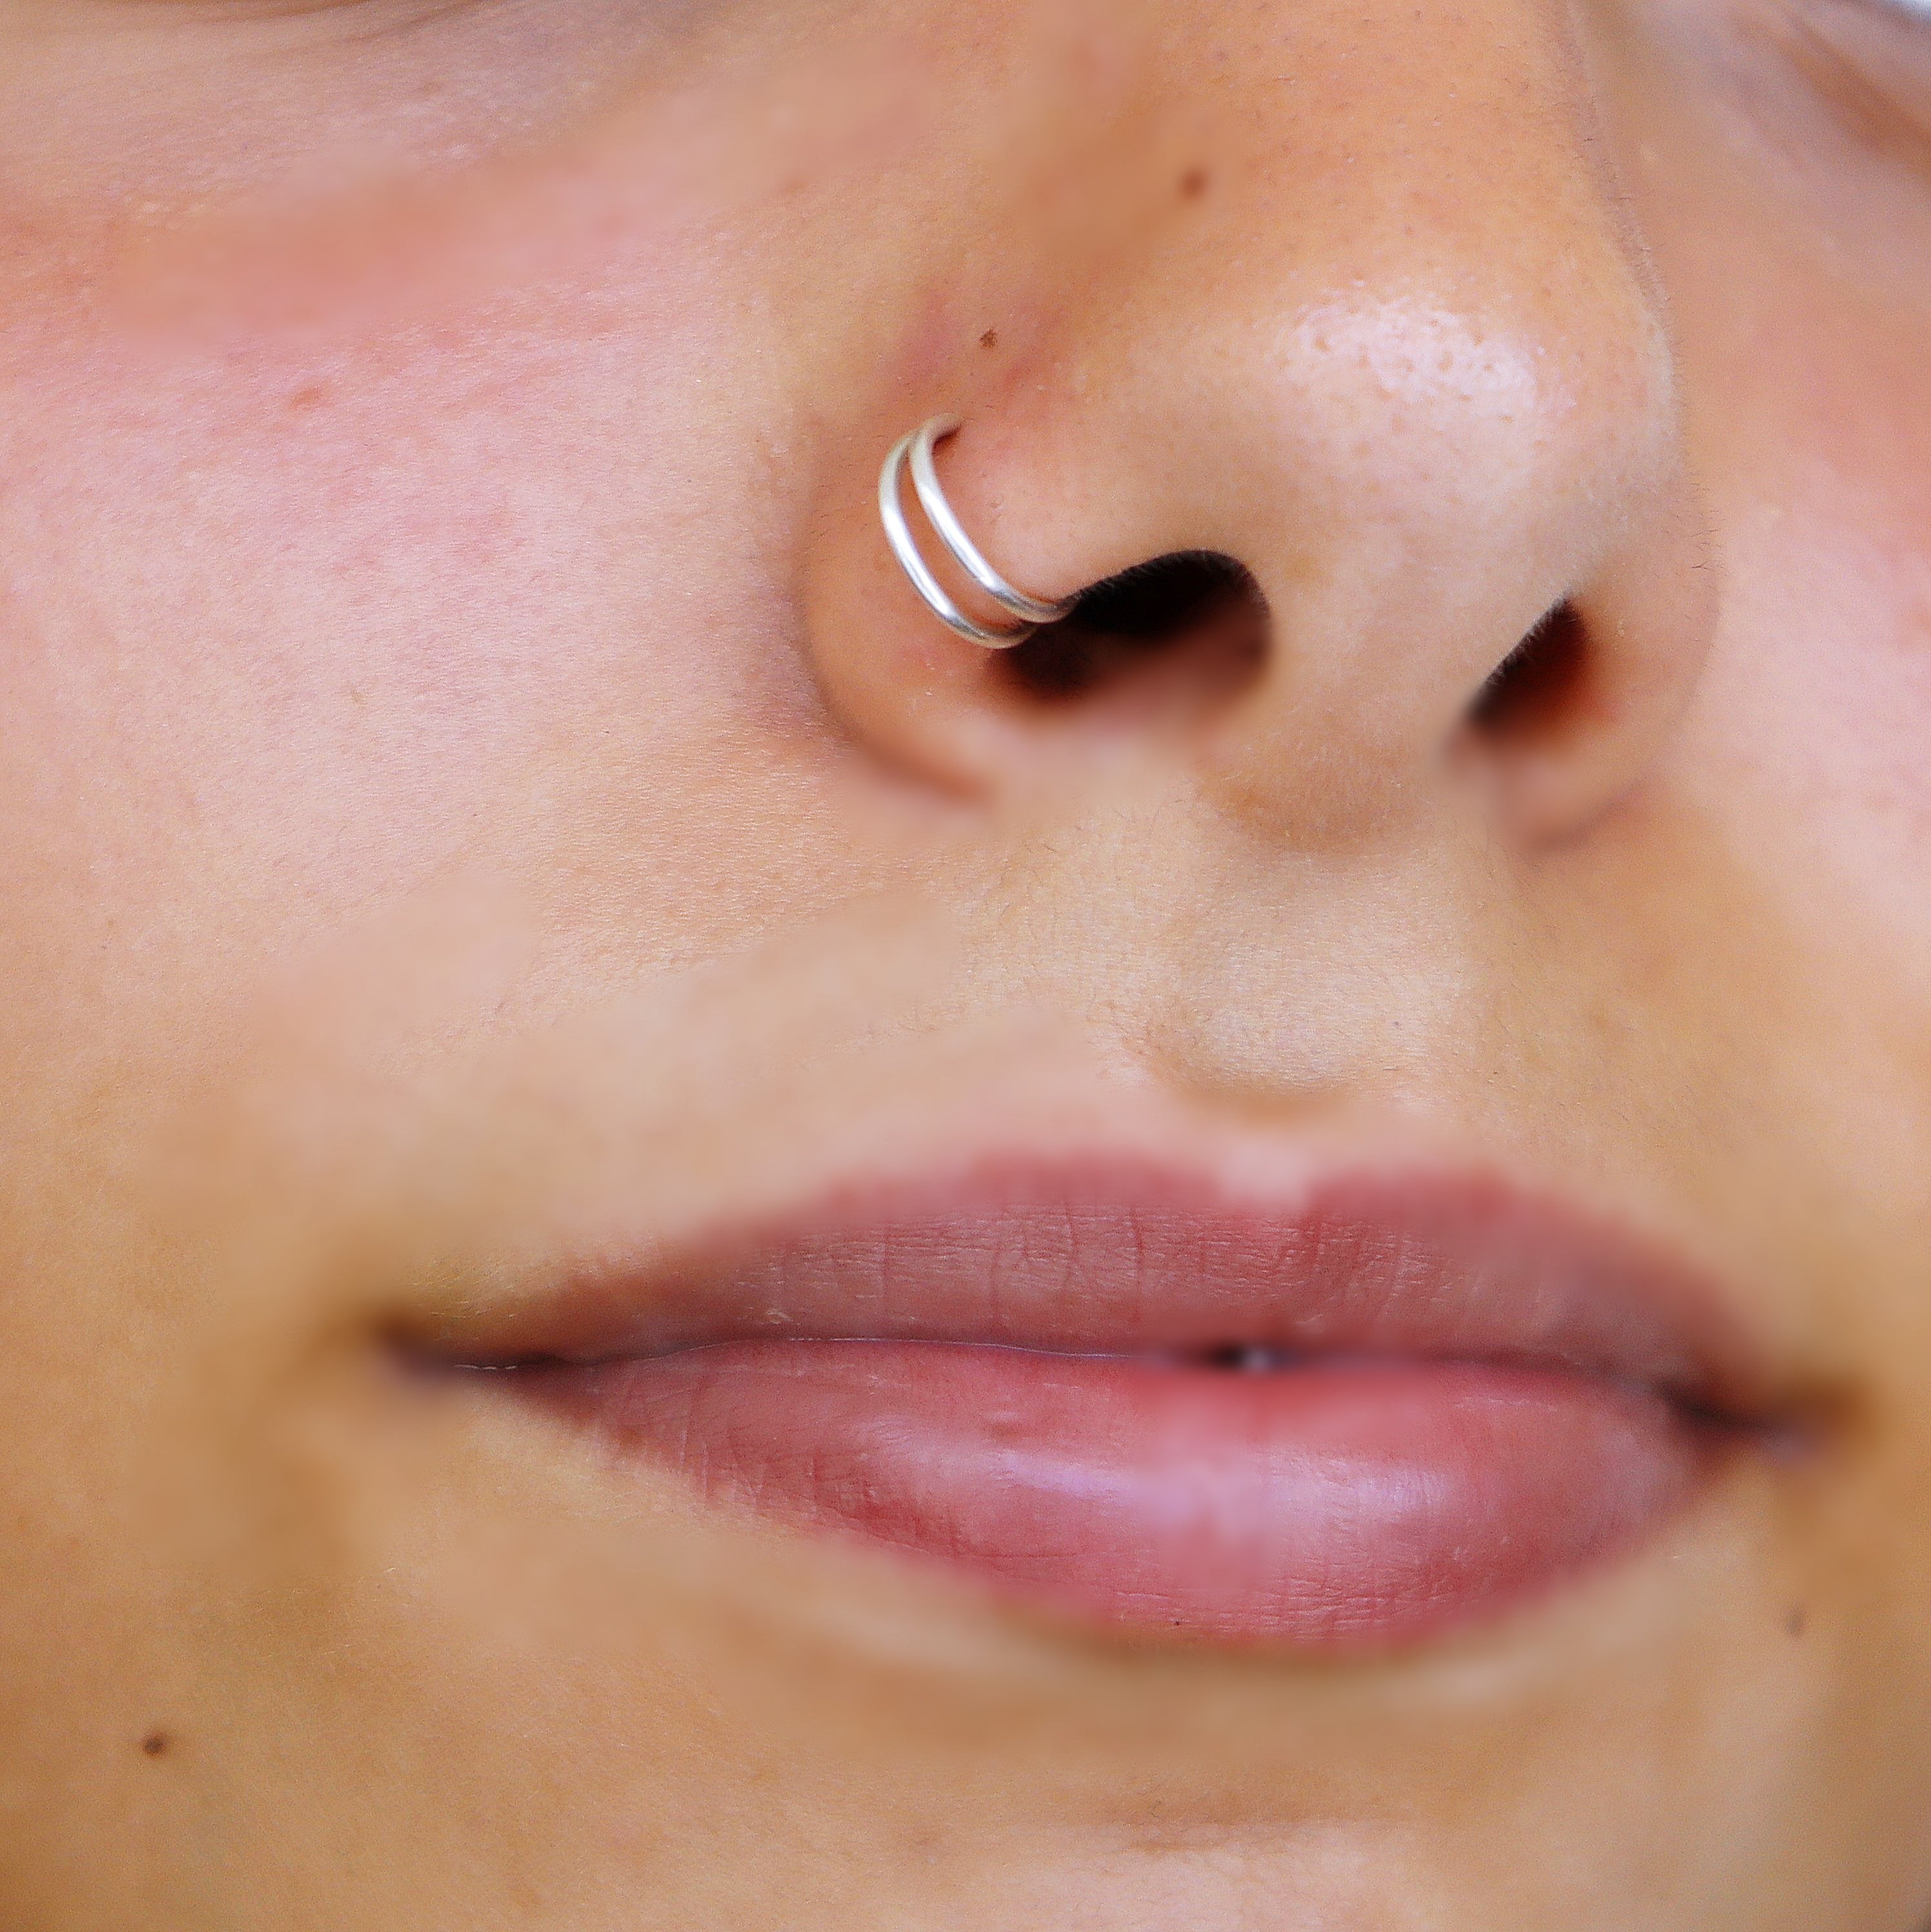 Amazon.com: 14K Gold Filled Small Gold Nose Ring Hoop for Women Men, 20G  8mm Small Thin Nose Piercing Jewelry, Cute Septum Rings, 20 22 24 Gauge 5mm  6mm 7mm 8mm 9mm 10mm